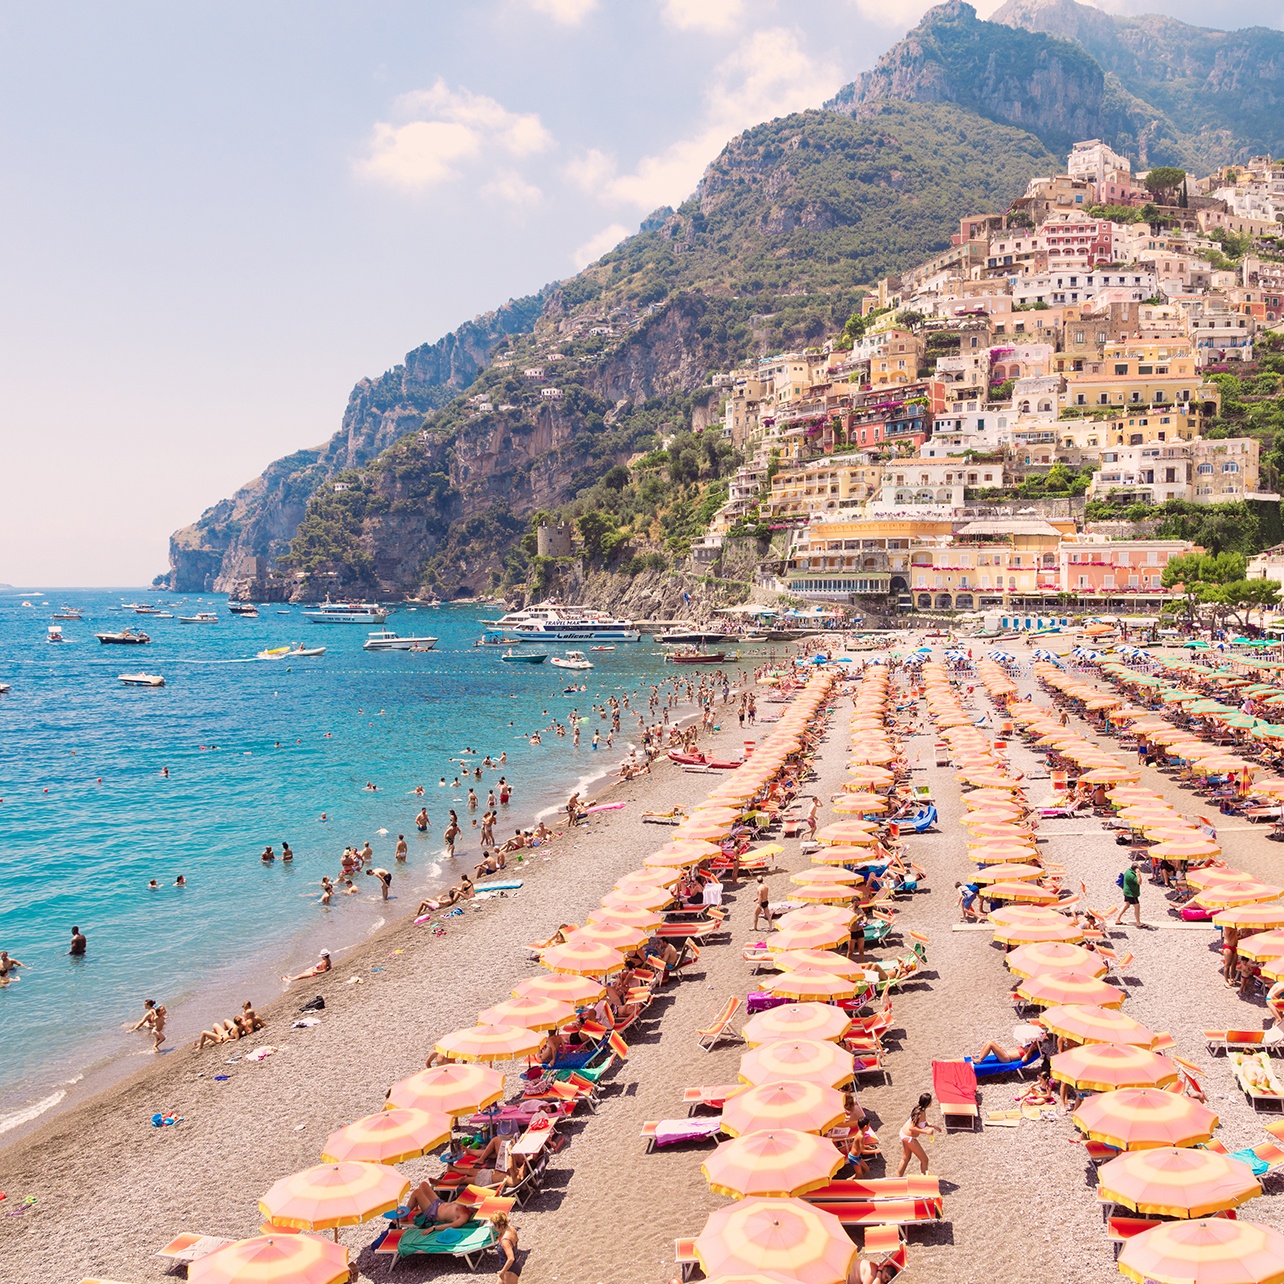 Photo of Positano Beach Vista lined with multi-colored umbrellas and people wading in the water